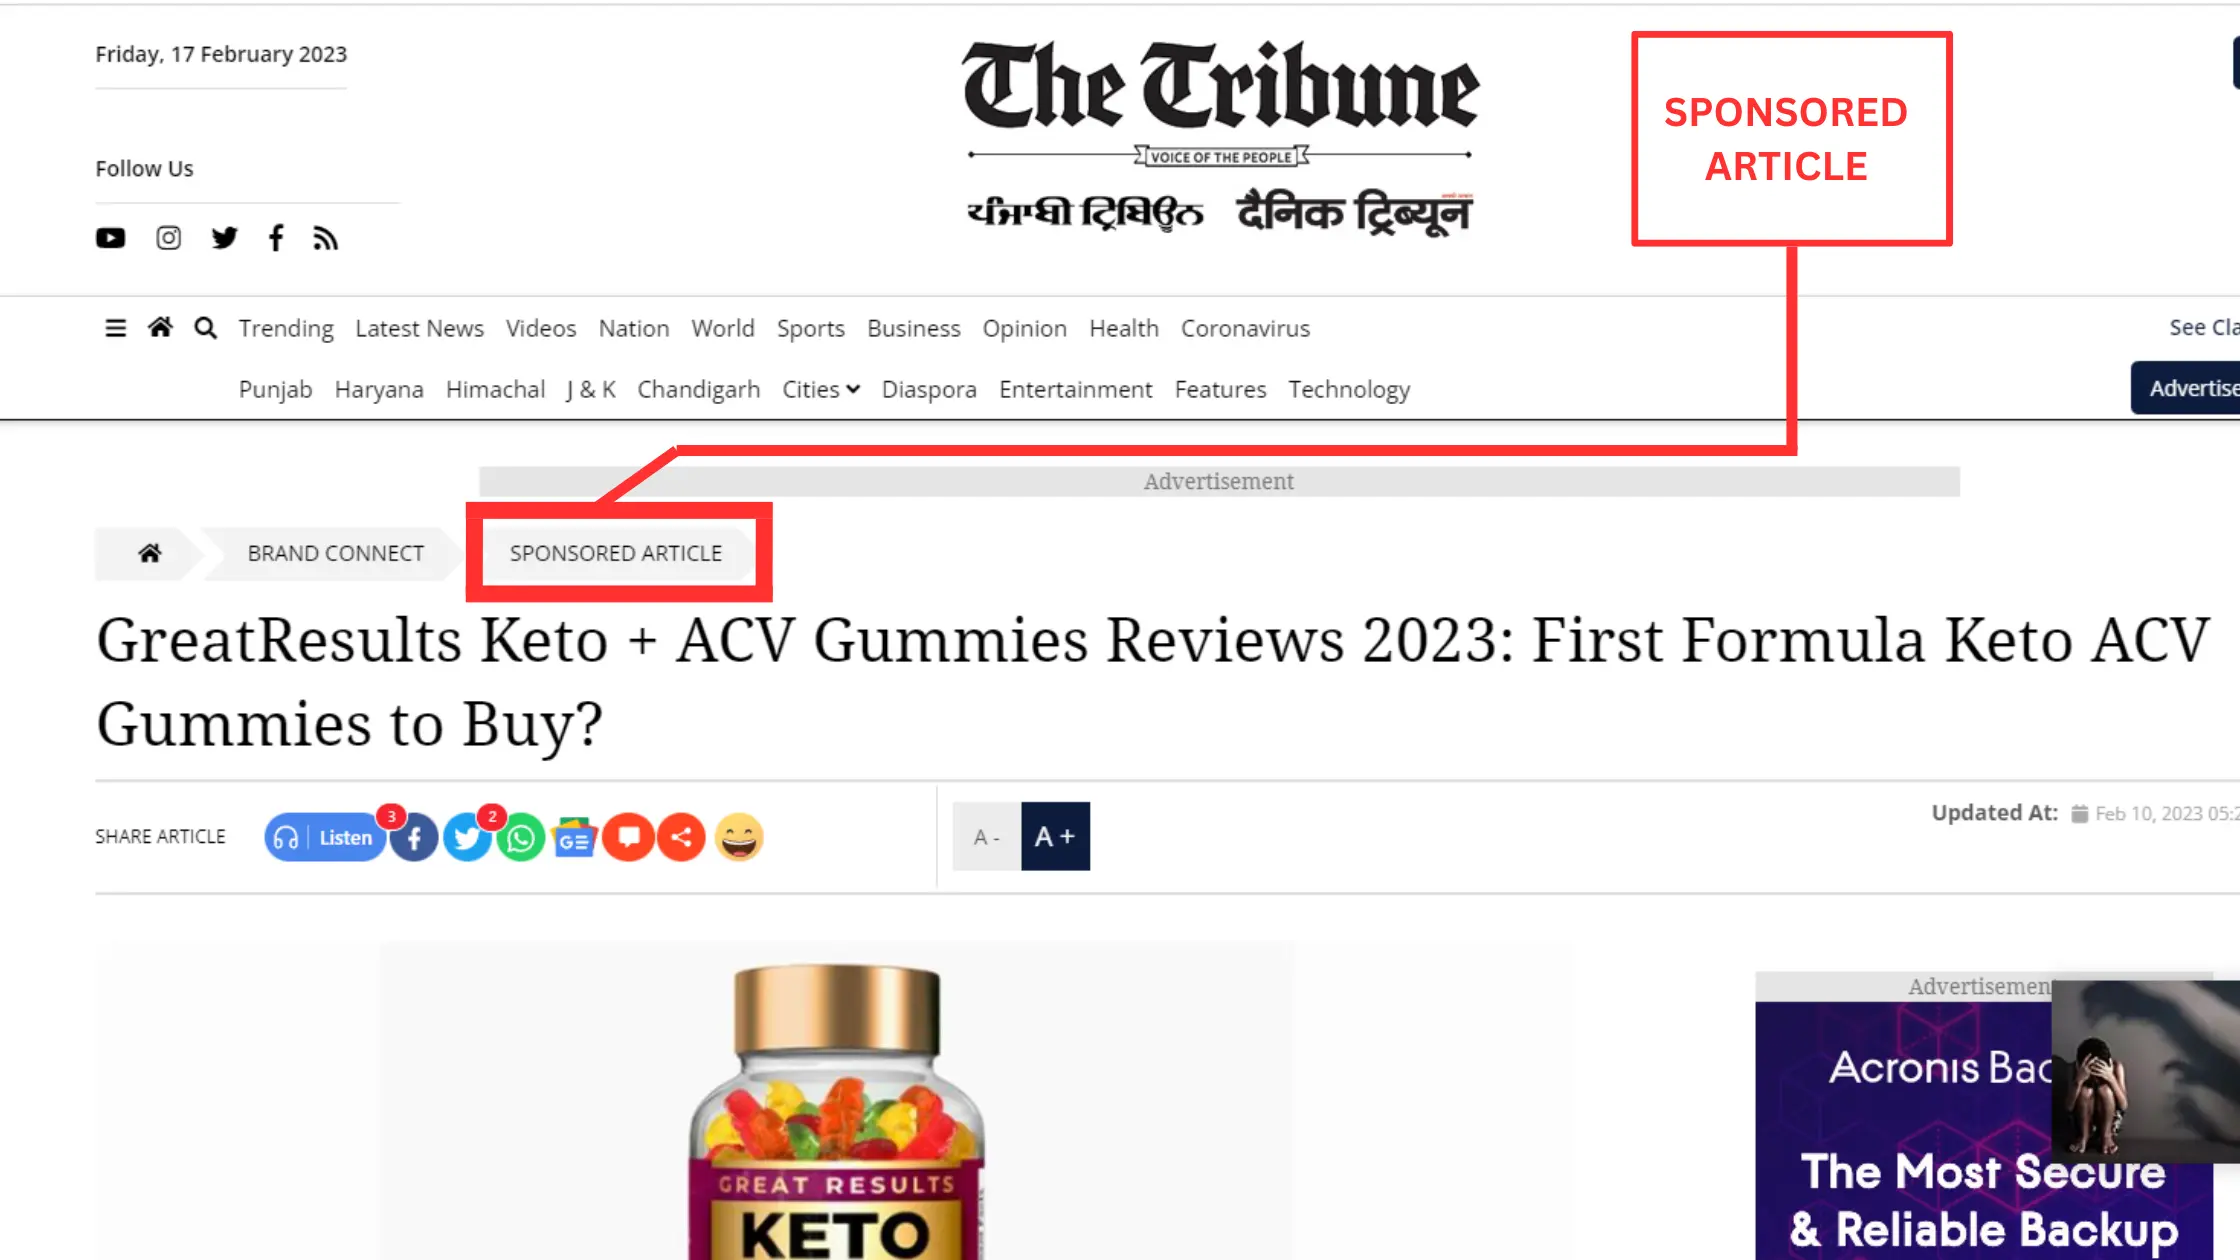 Great Results Keto ACV Gummies Sponsored Article